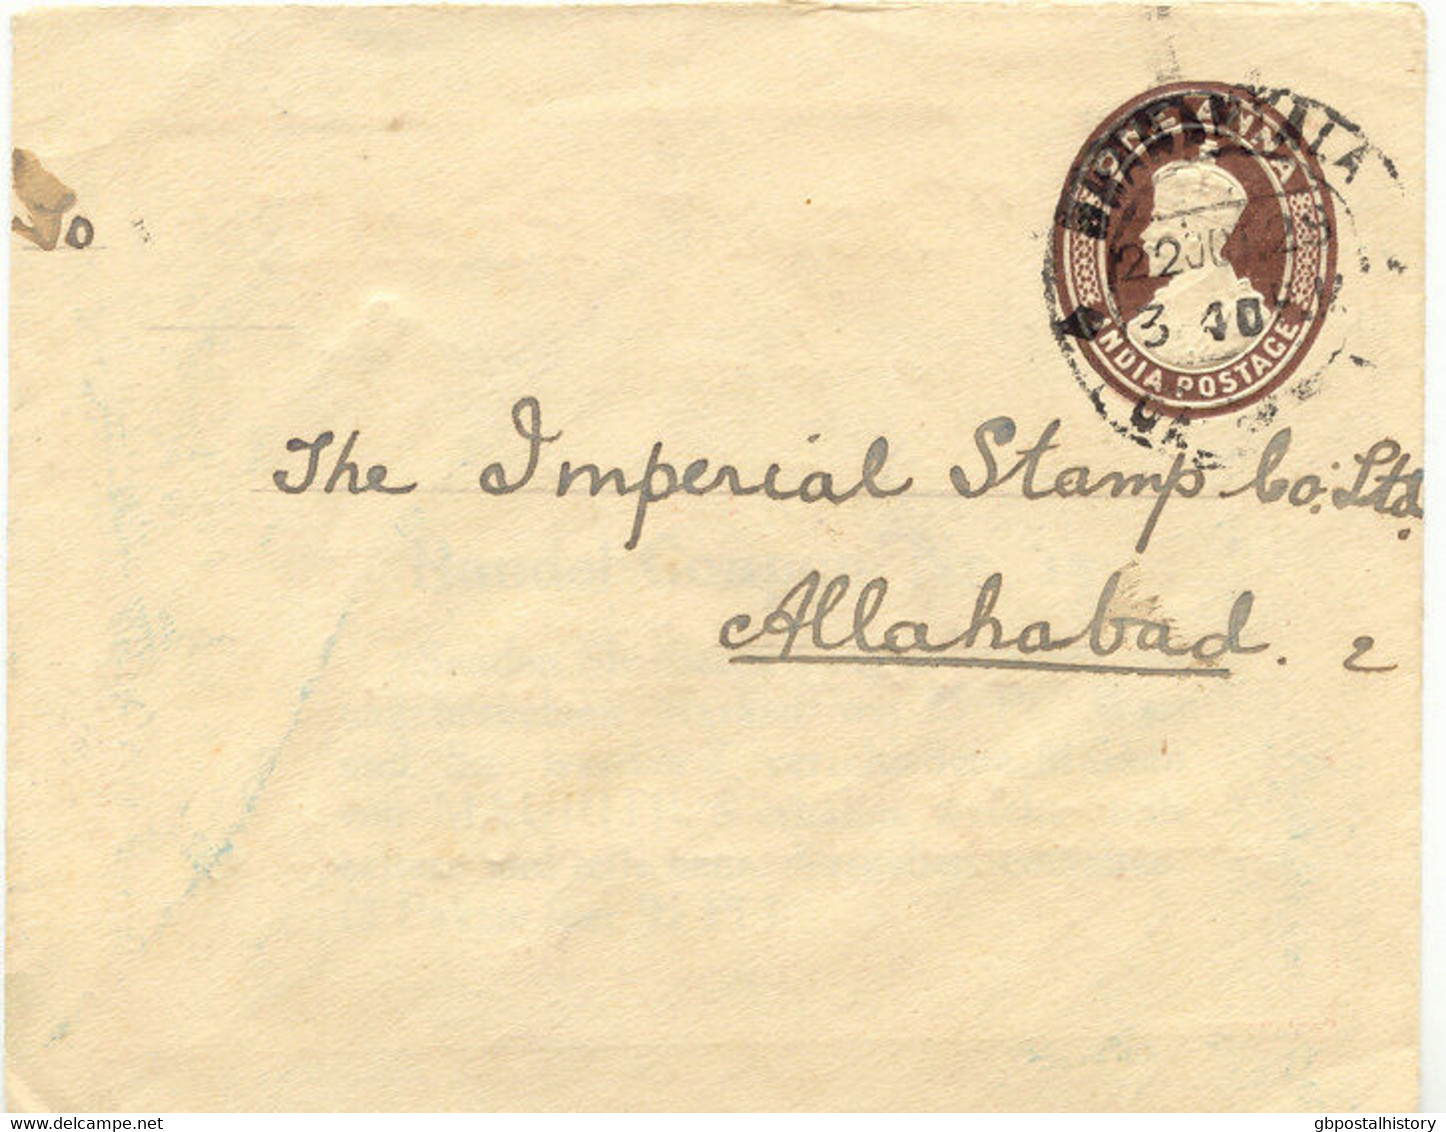 INDIA 1929 GV One Anna Stamped To Order Postal Stationery Envelope (ADVERTISING: Imperial Stamp Co. Ltd, Allahabad) - 1911-35  George V